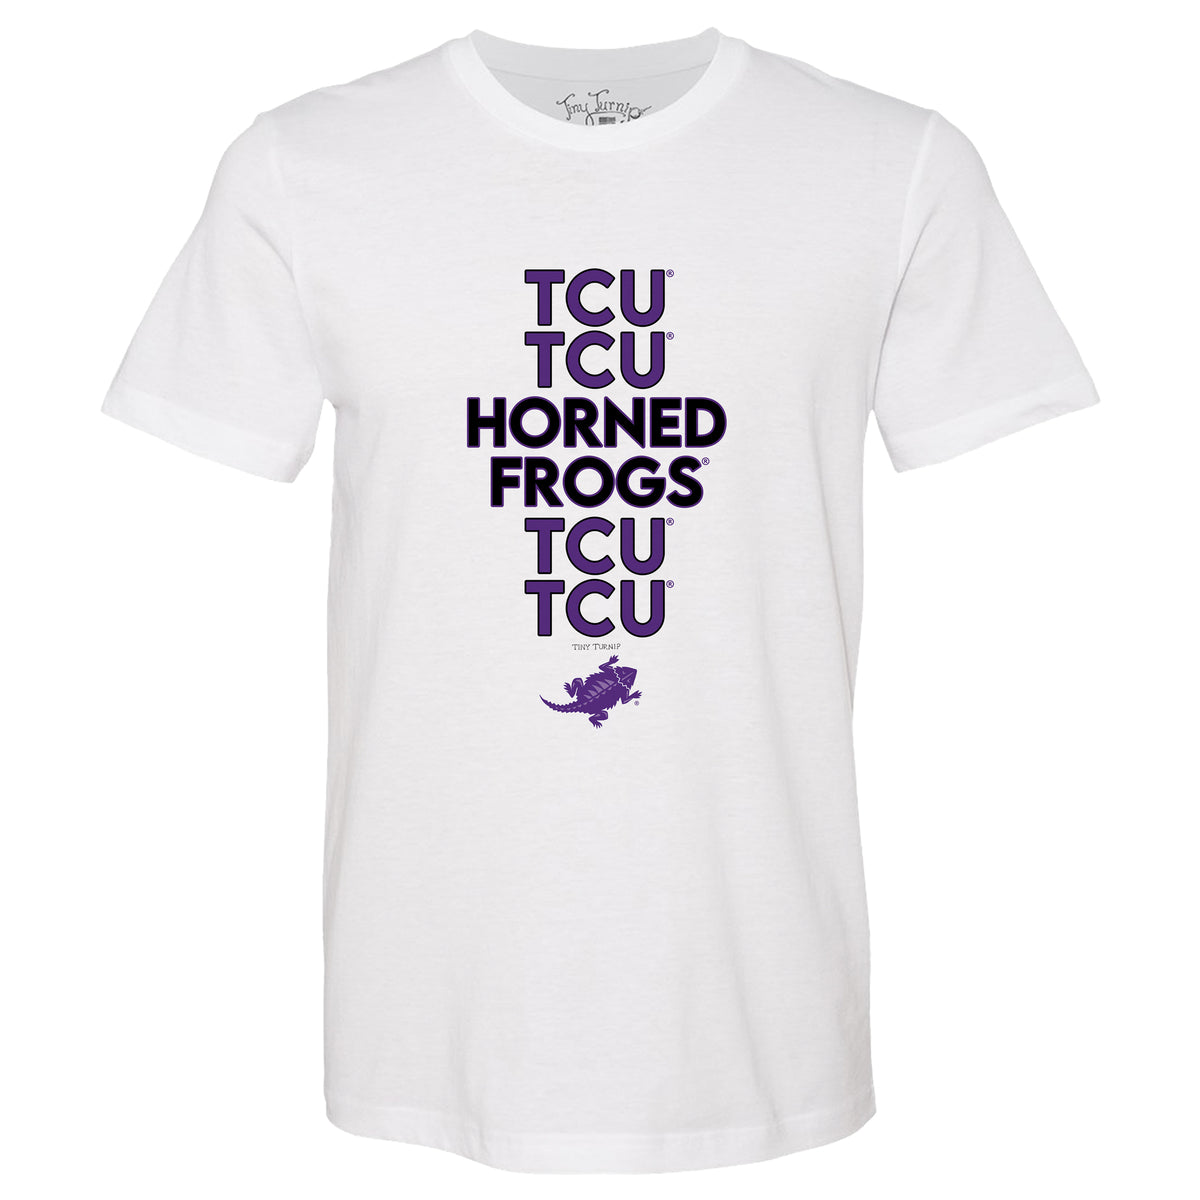 TCU Horned Frogs Stacked Tee Shirt